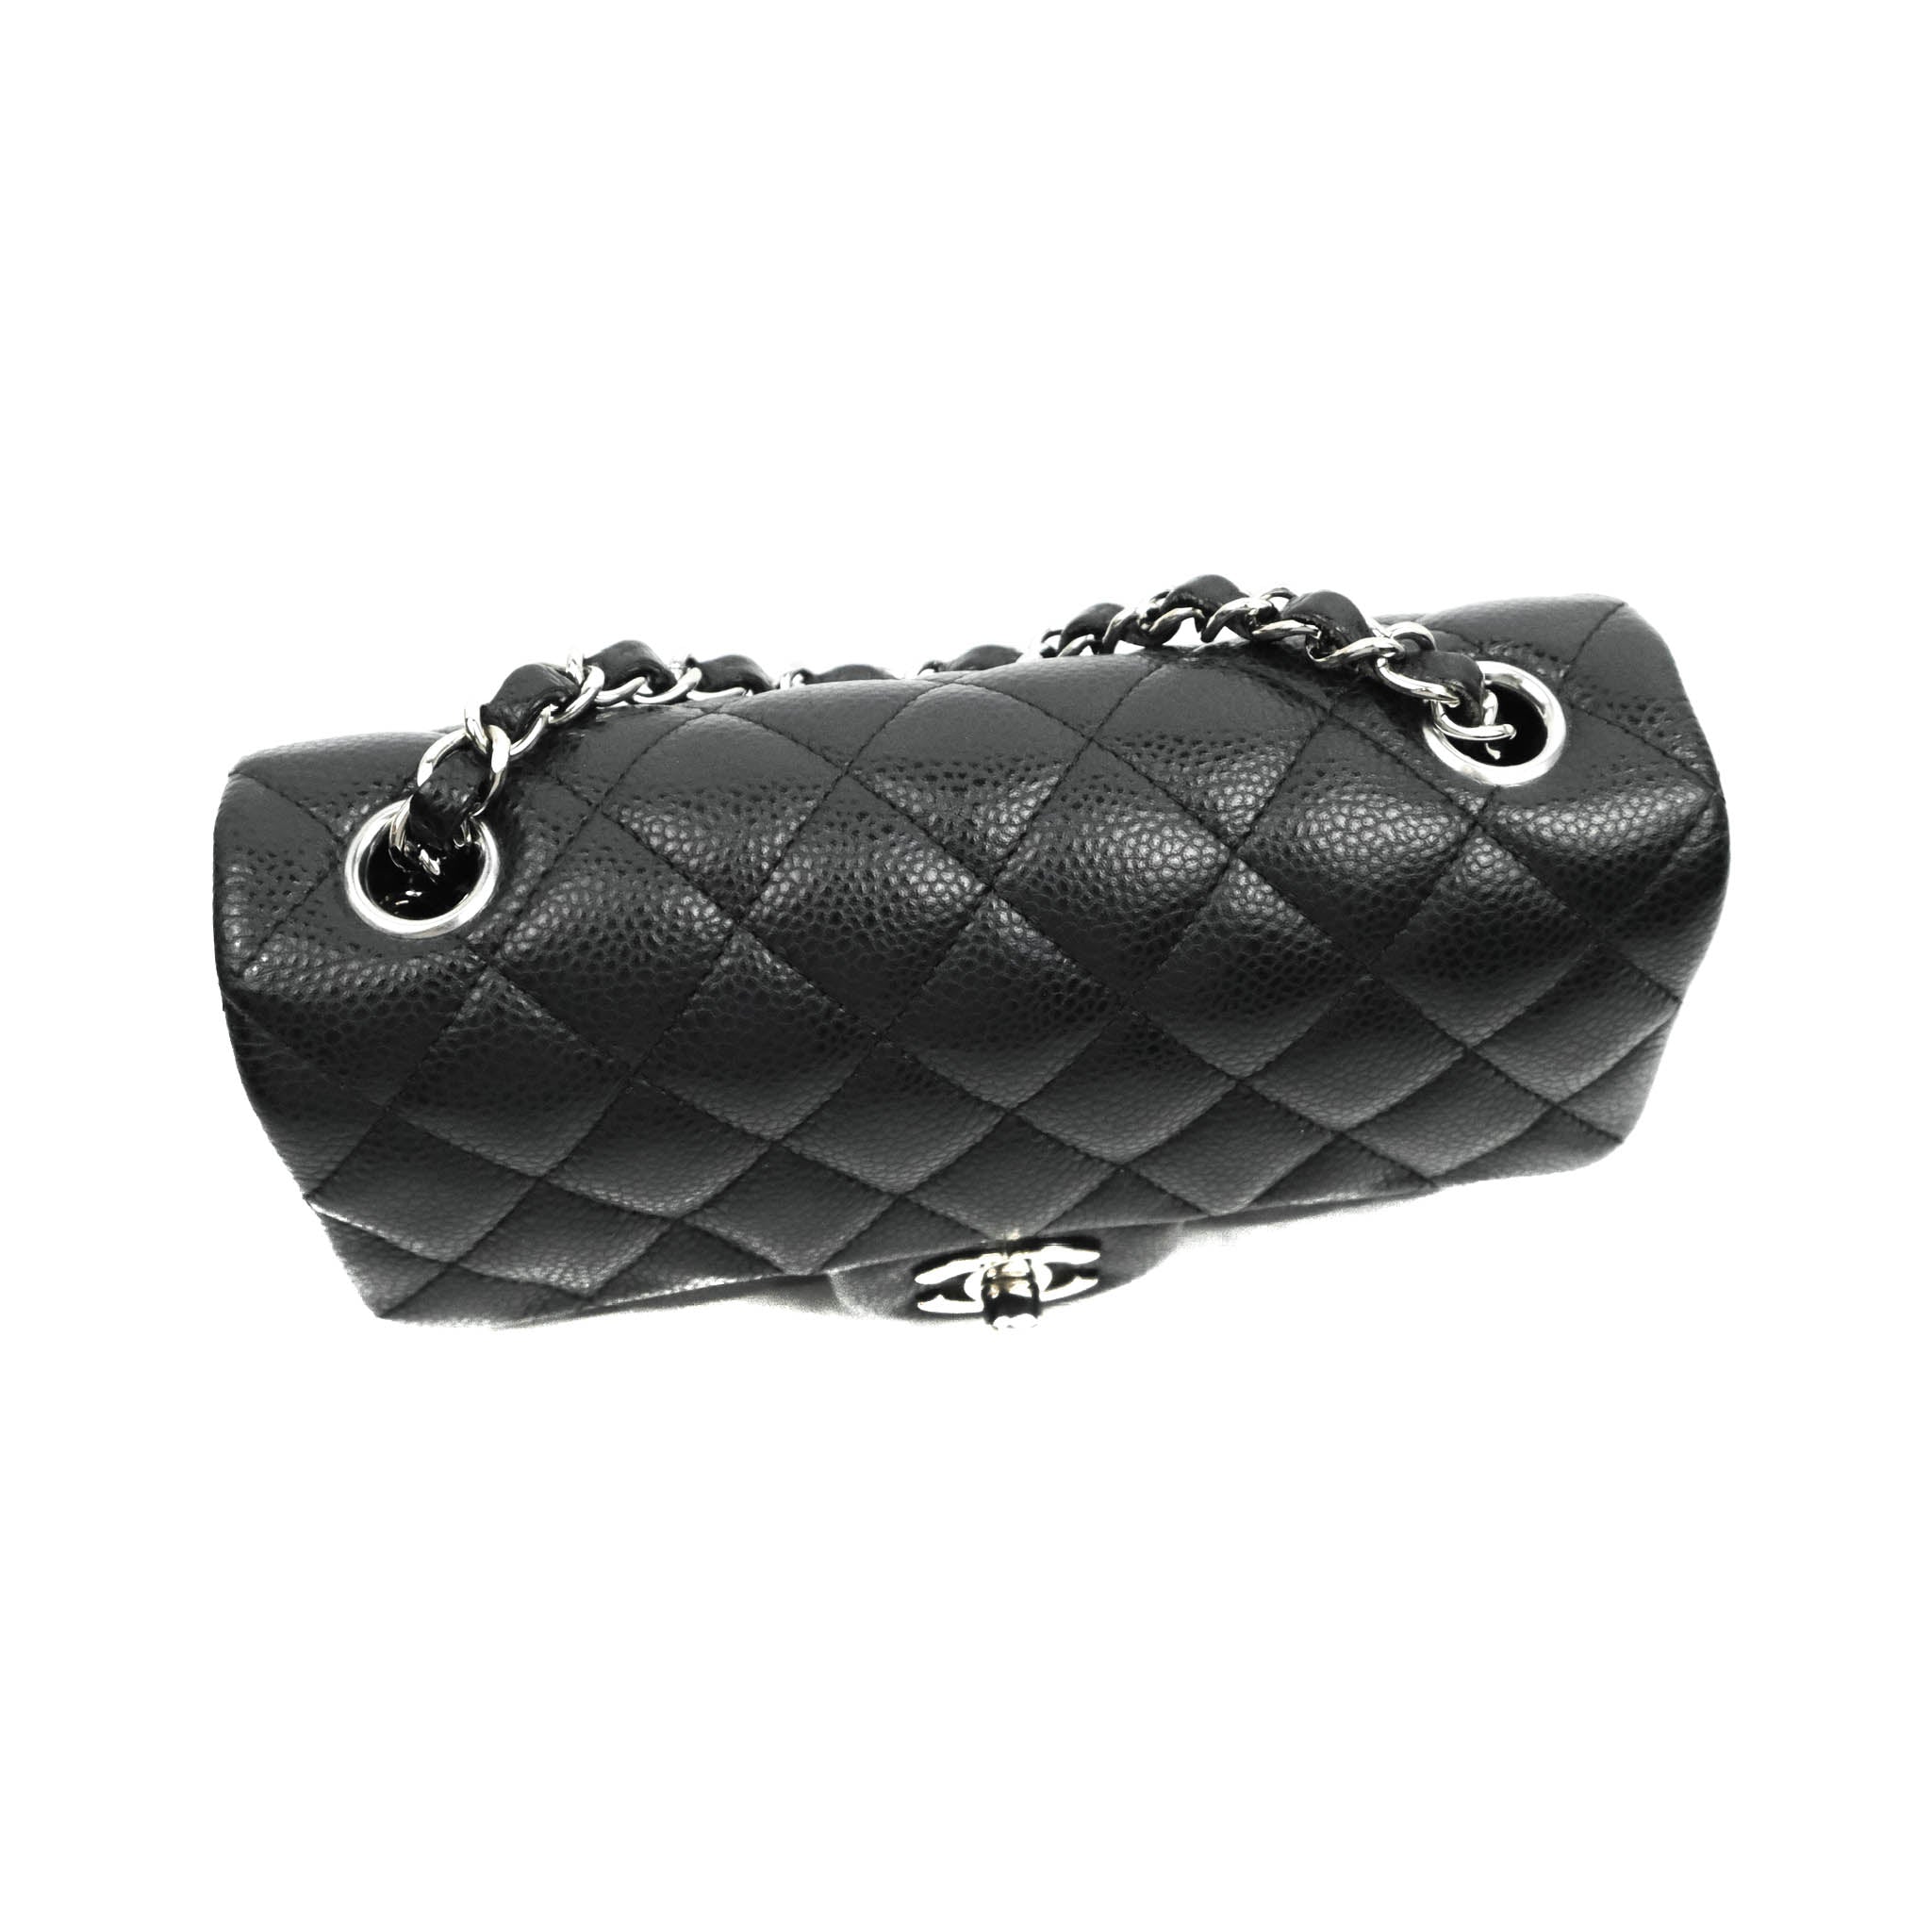 Chanel Mini Square Quilted Black Lambskin Silver Hardware – Coco Approved  Studio